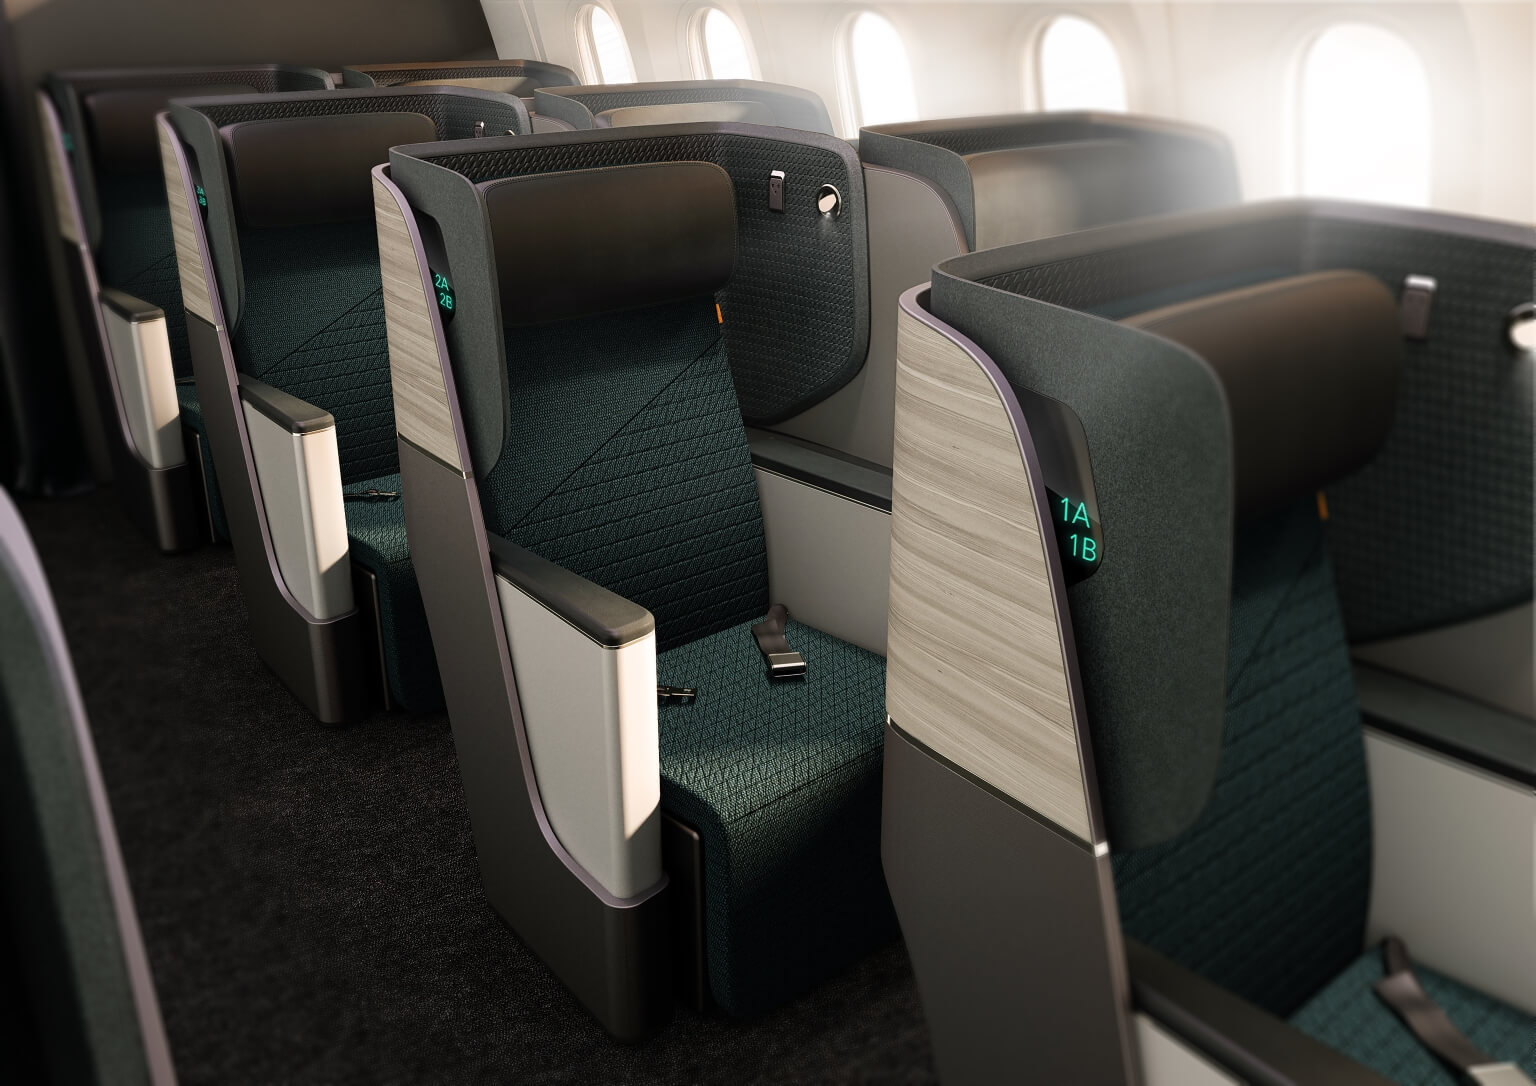 The HAECO Eclipse seat which is rumoured to be the model for Emirates' new Premium Economy